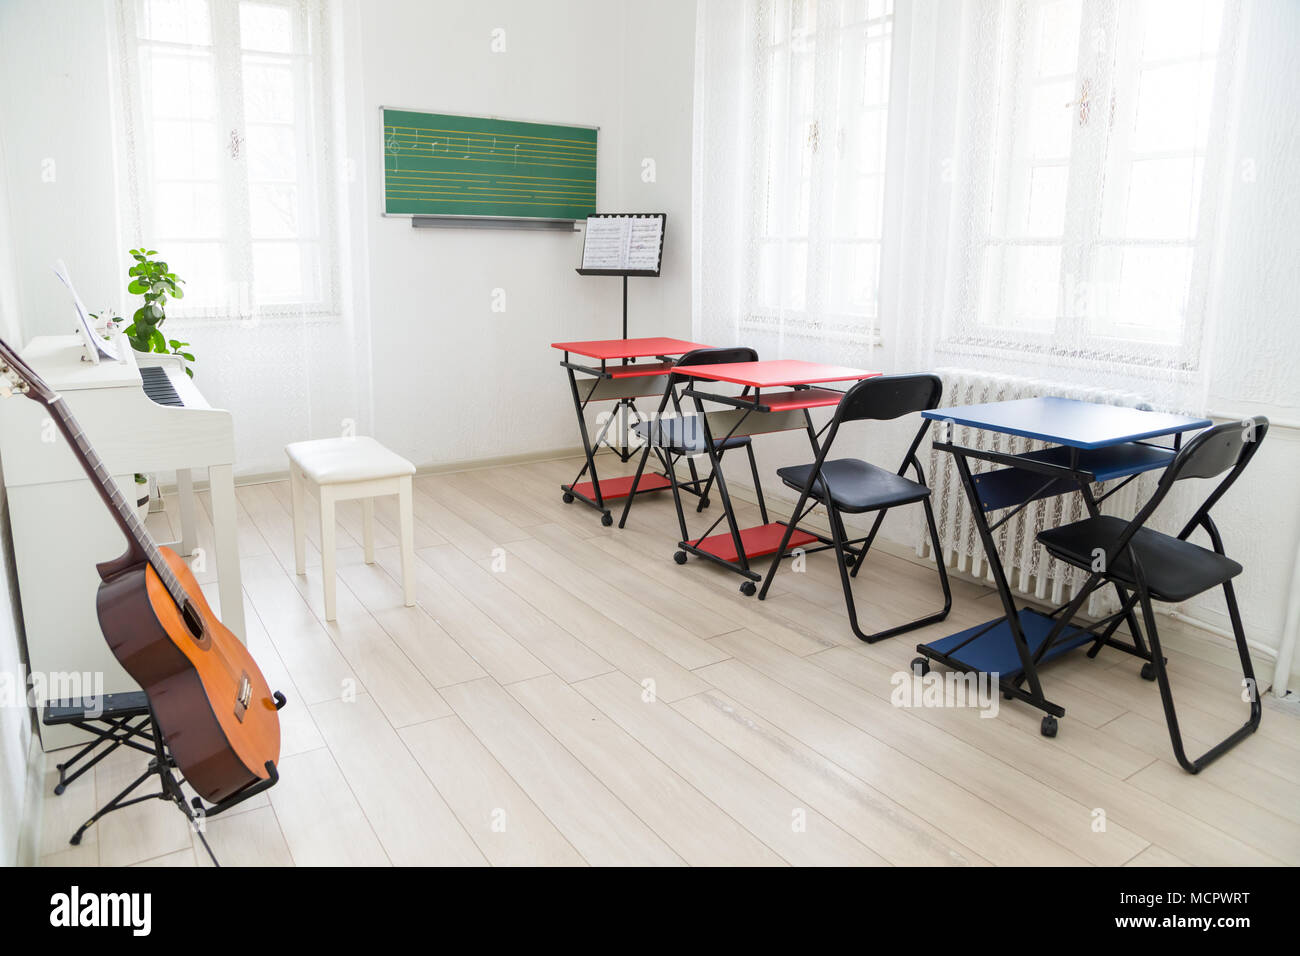 Modern daylight classroom for teaching music. Guitar, white piano and greenboard in modern music classroom Stock Photo